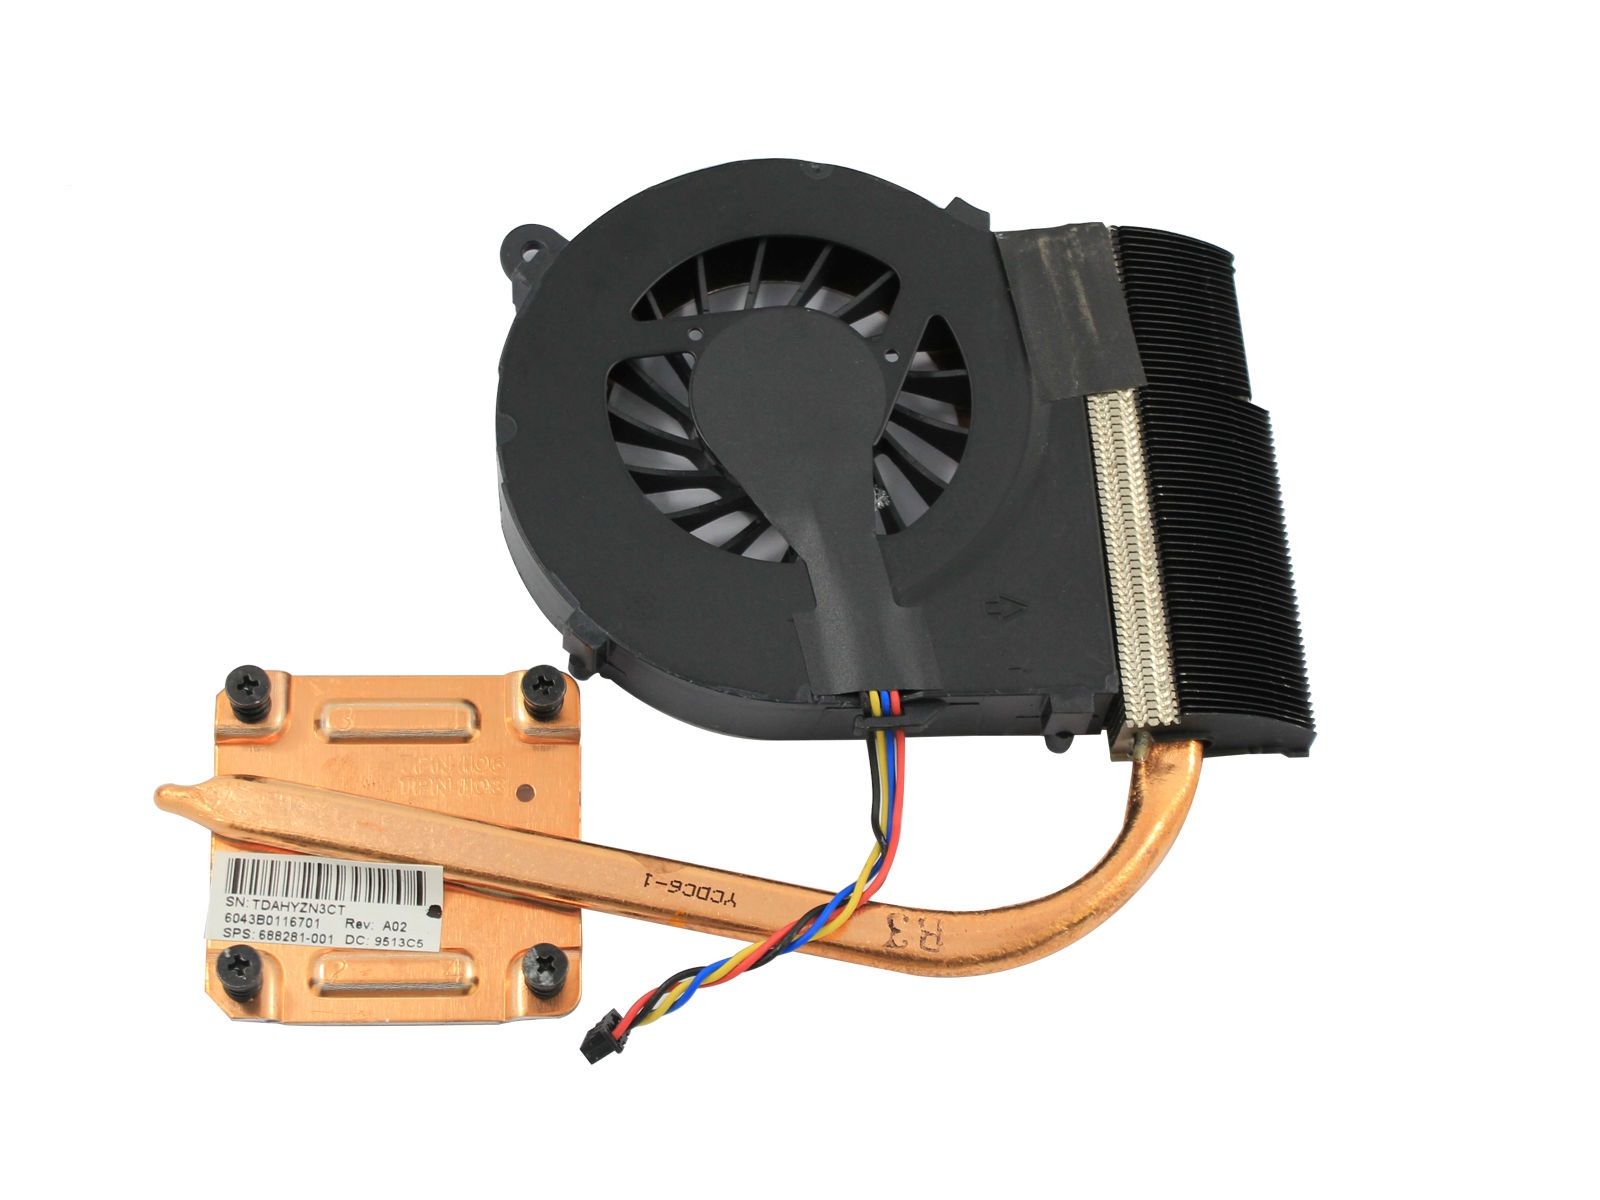 New Cooler For Hp 1000 00 Cq45 450 455 255 00 Bf G6 1b G6 1c G6 1d 00 2c12nr Cpu Cooling Heatsink With Fan 61 001 6043b Brand Best Quality And Cheapest Price Dhgate Com